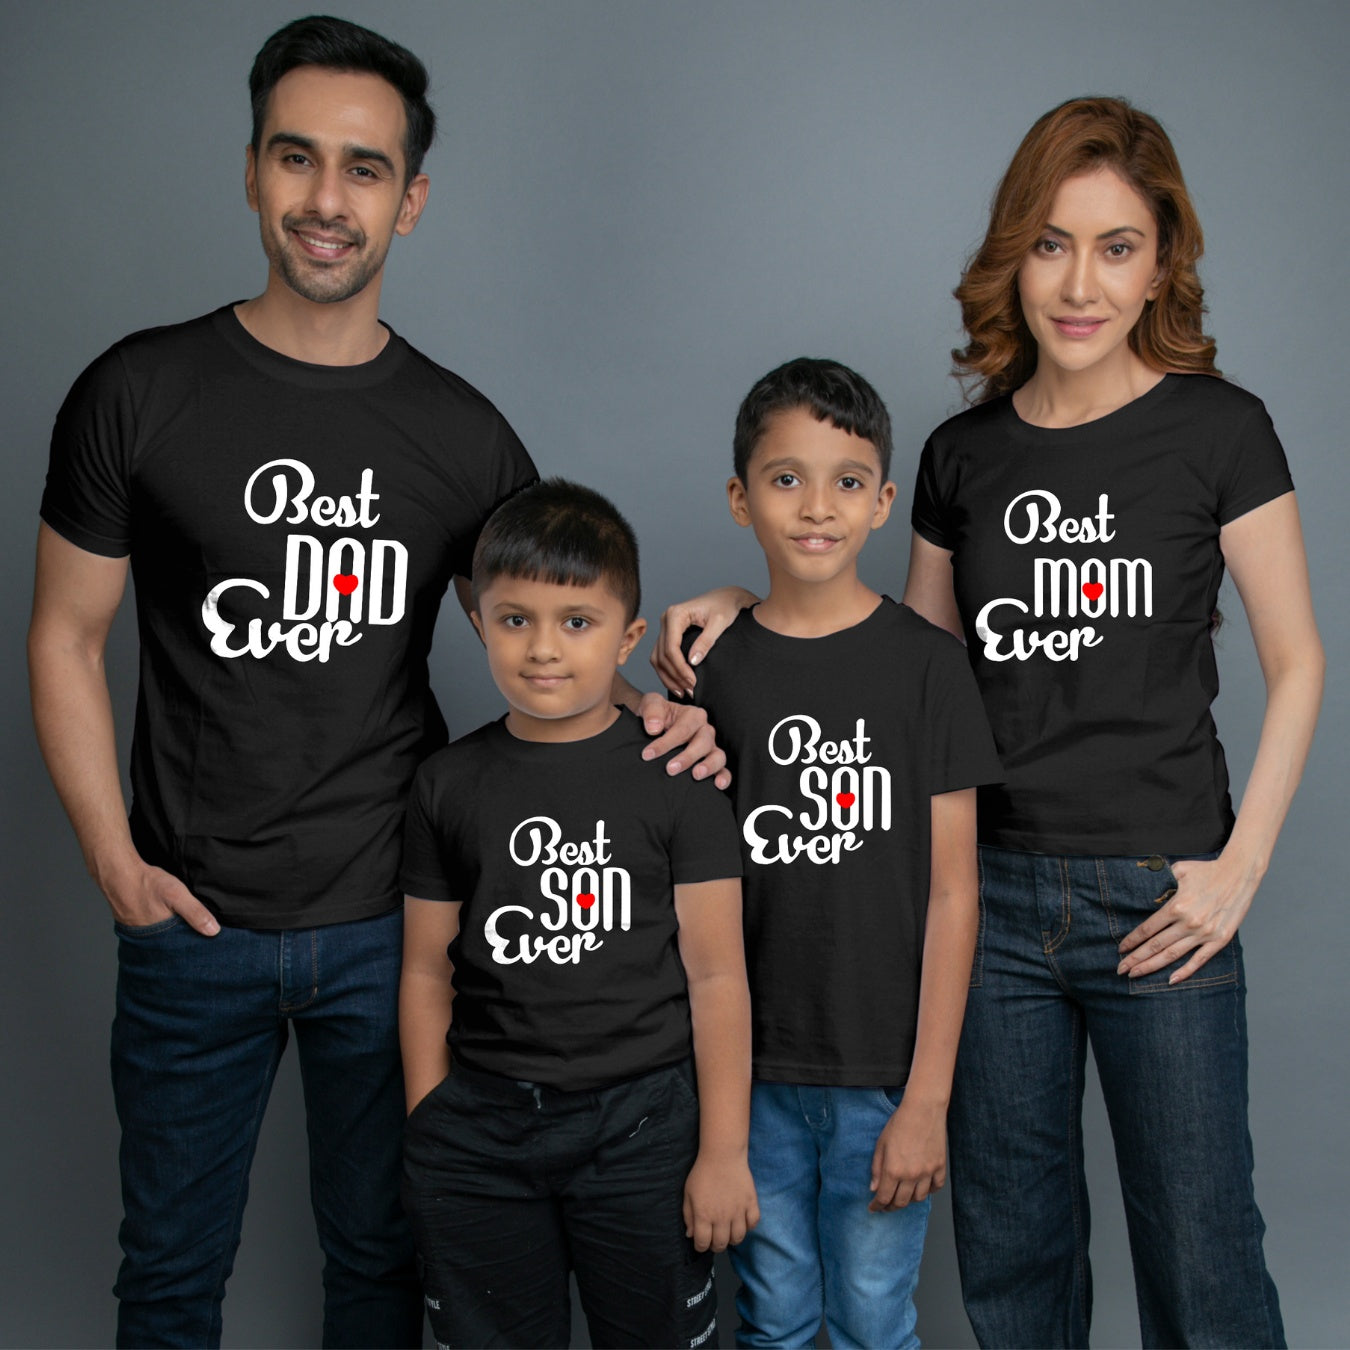 Family t shirts set of 4 Mom Dad Two Sons in Black Colour - Best Mom Dad Son Ever Variant